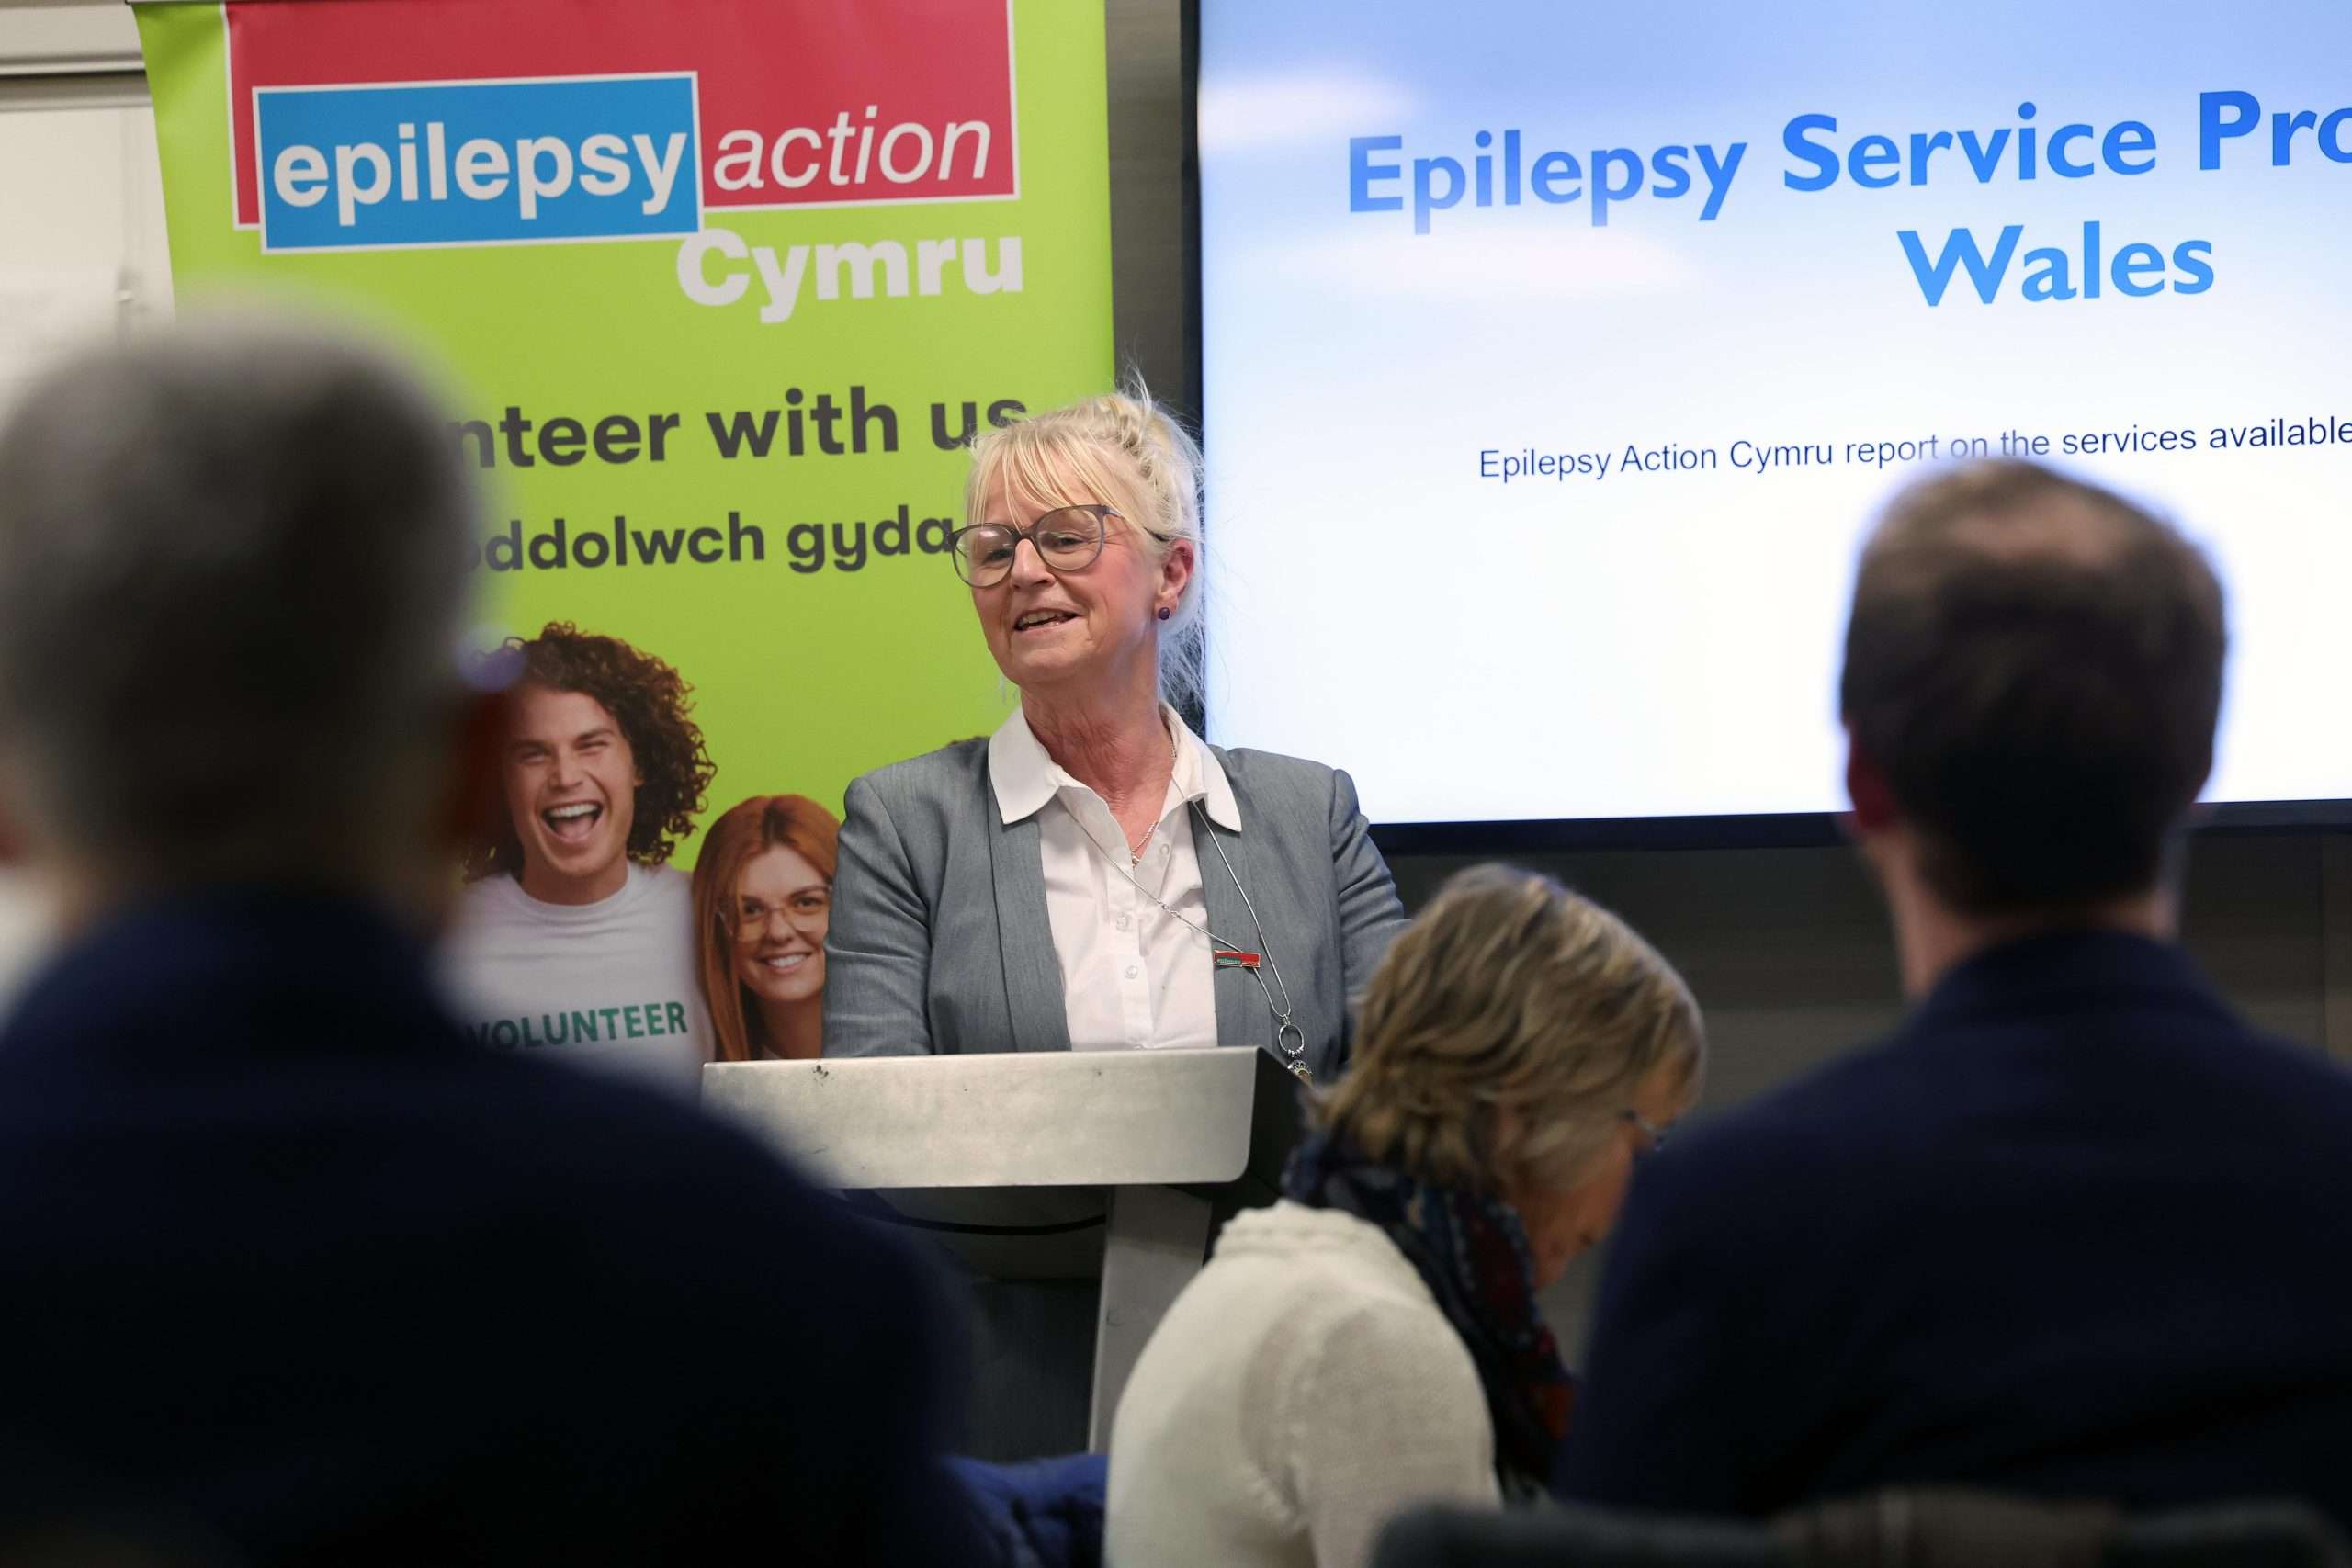 Epilepsy care in Wales suffers ‘woefully short’ staffing levels